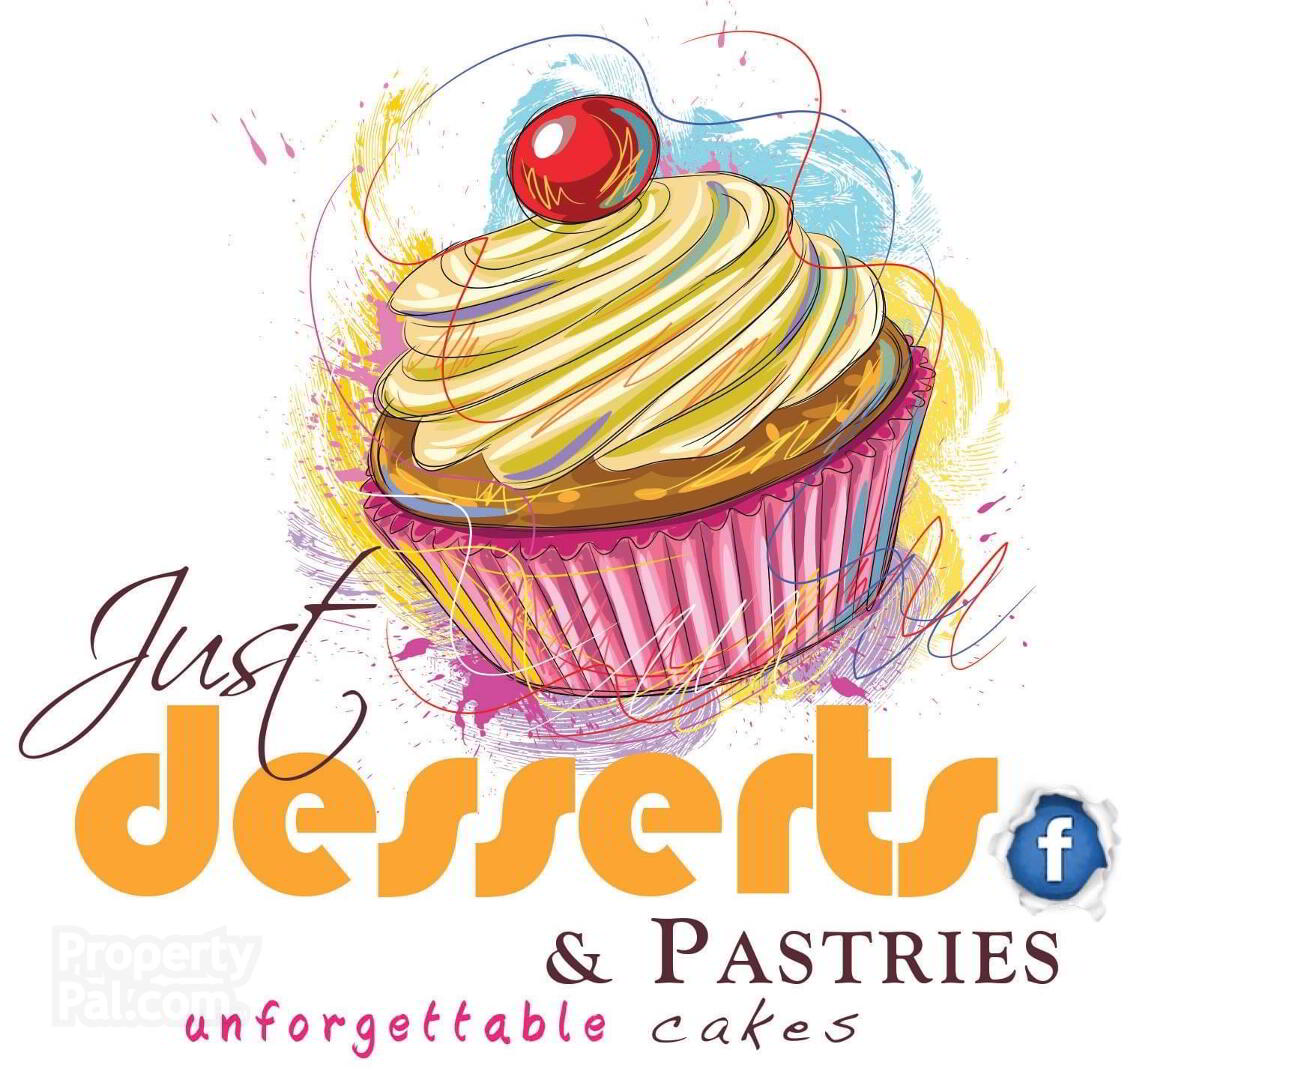 Just Desserts & Pastries, 5b Mayfair Business Centre